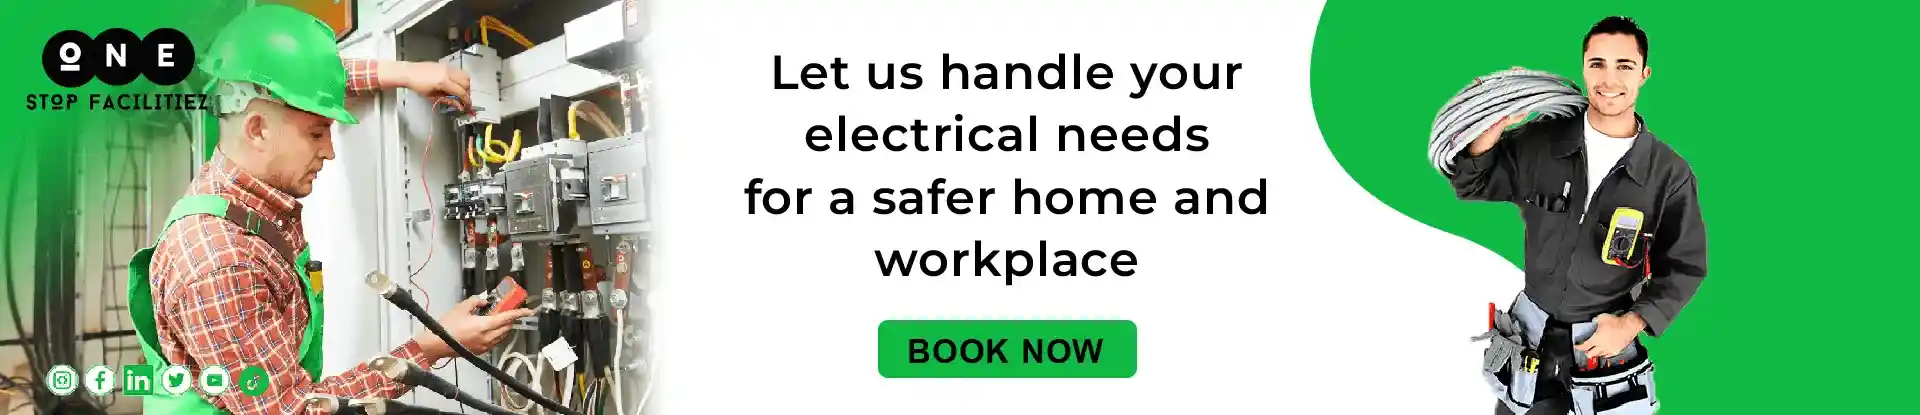 Electrical Service Image